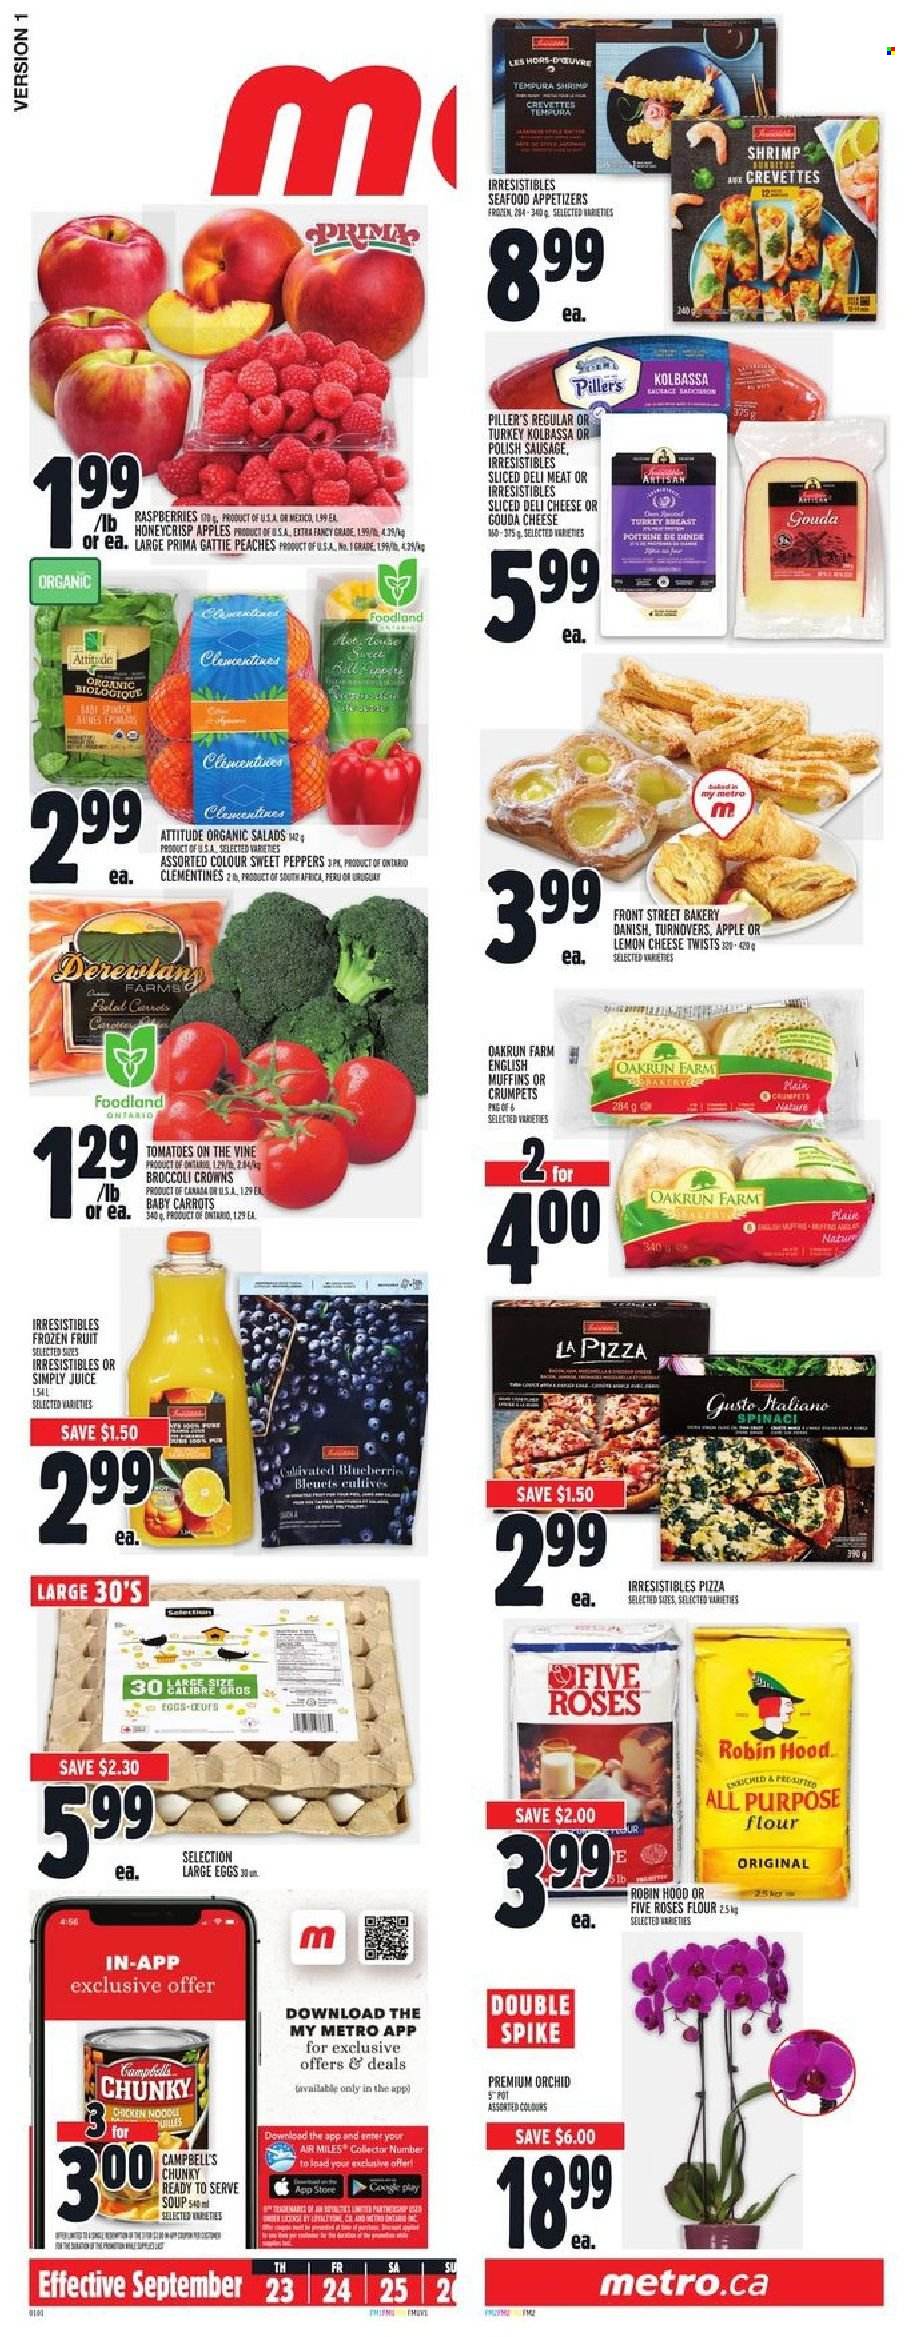 thumbnail - Metro Flyer - September 23, 2021 - September 29, 2021 - Sales products - english muffins, crumpets, turnovers, carrots, sweet peppers, salad, peppers, apples, clementines, peaches, seafood, shrimps, Campbell's, pizza, soup, noodles, sausage, polish sausage, gouda, large eggs, flour, juice. Page 14.